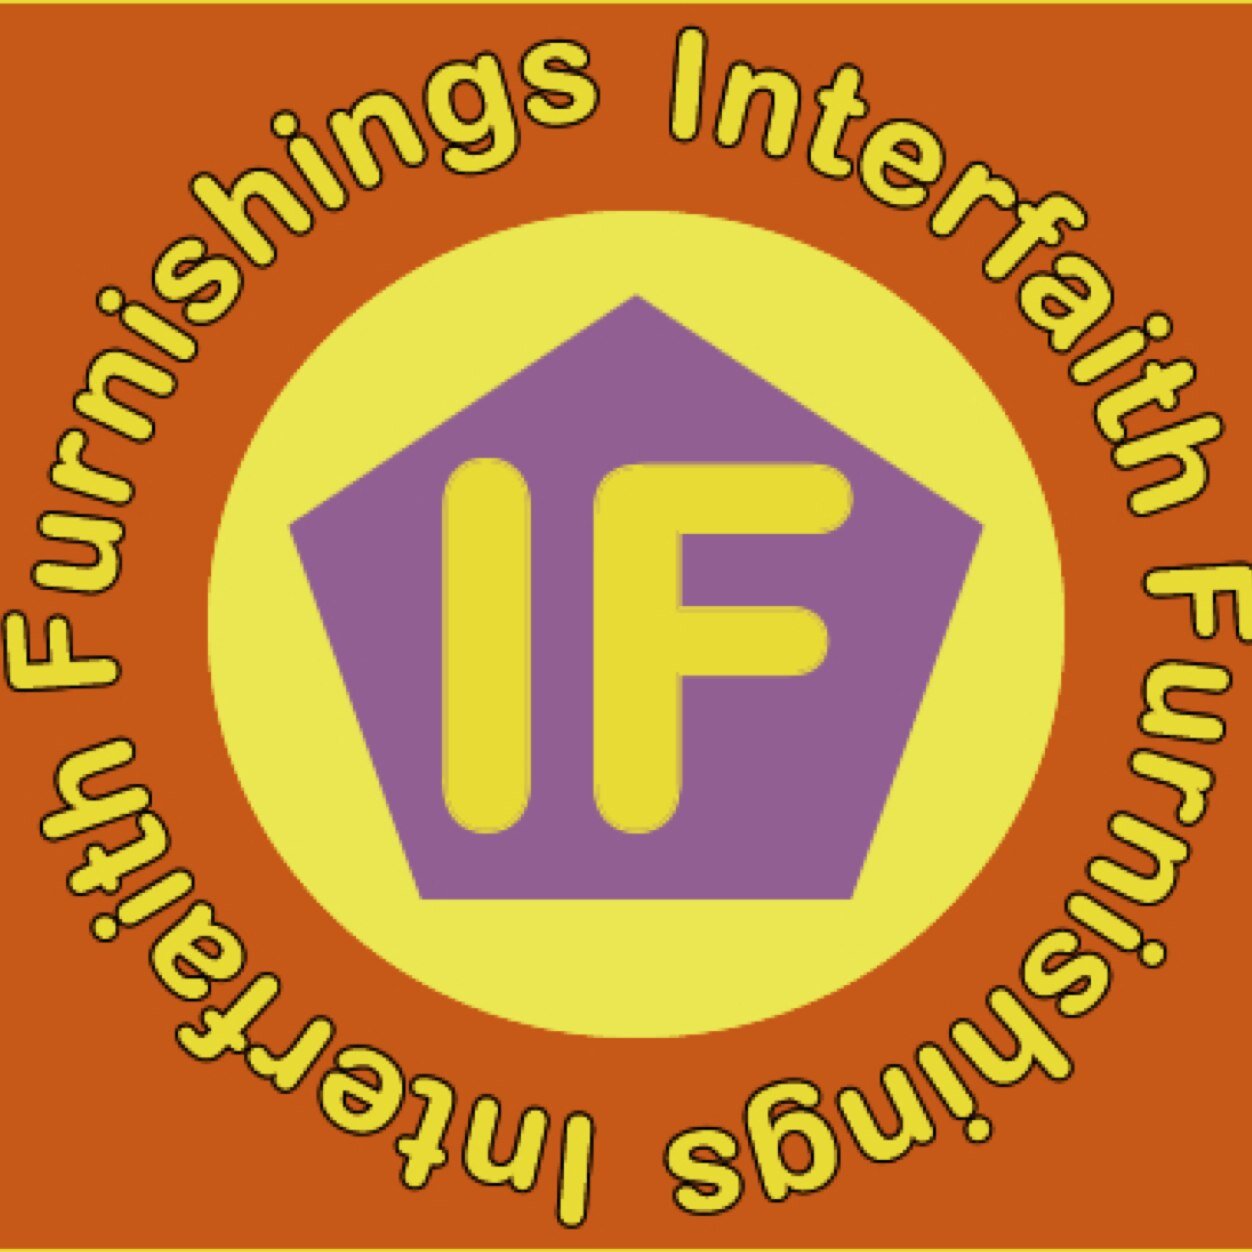 Interfaith Furnishings in Randolph, New Jersey is a nonprofit volunteer organization that accepts donated furniture and distributes it to families in need.